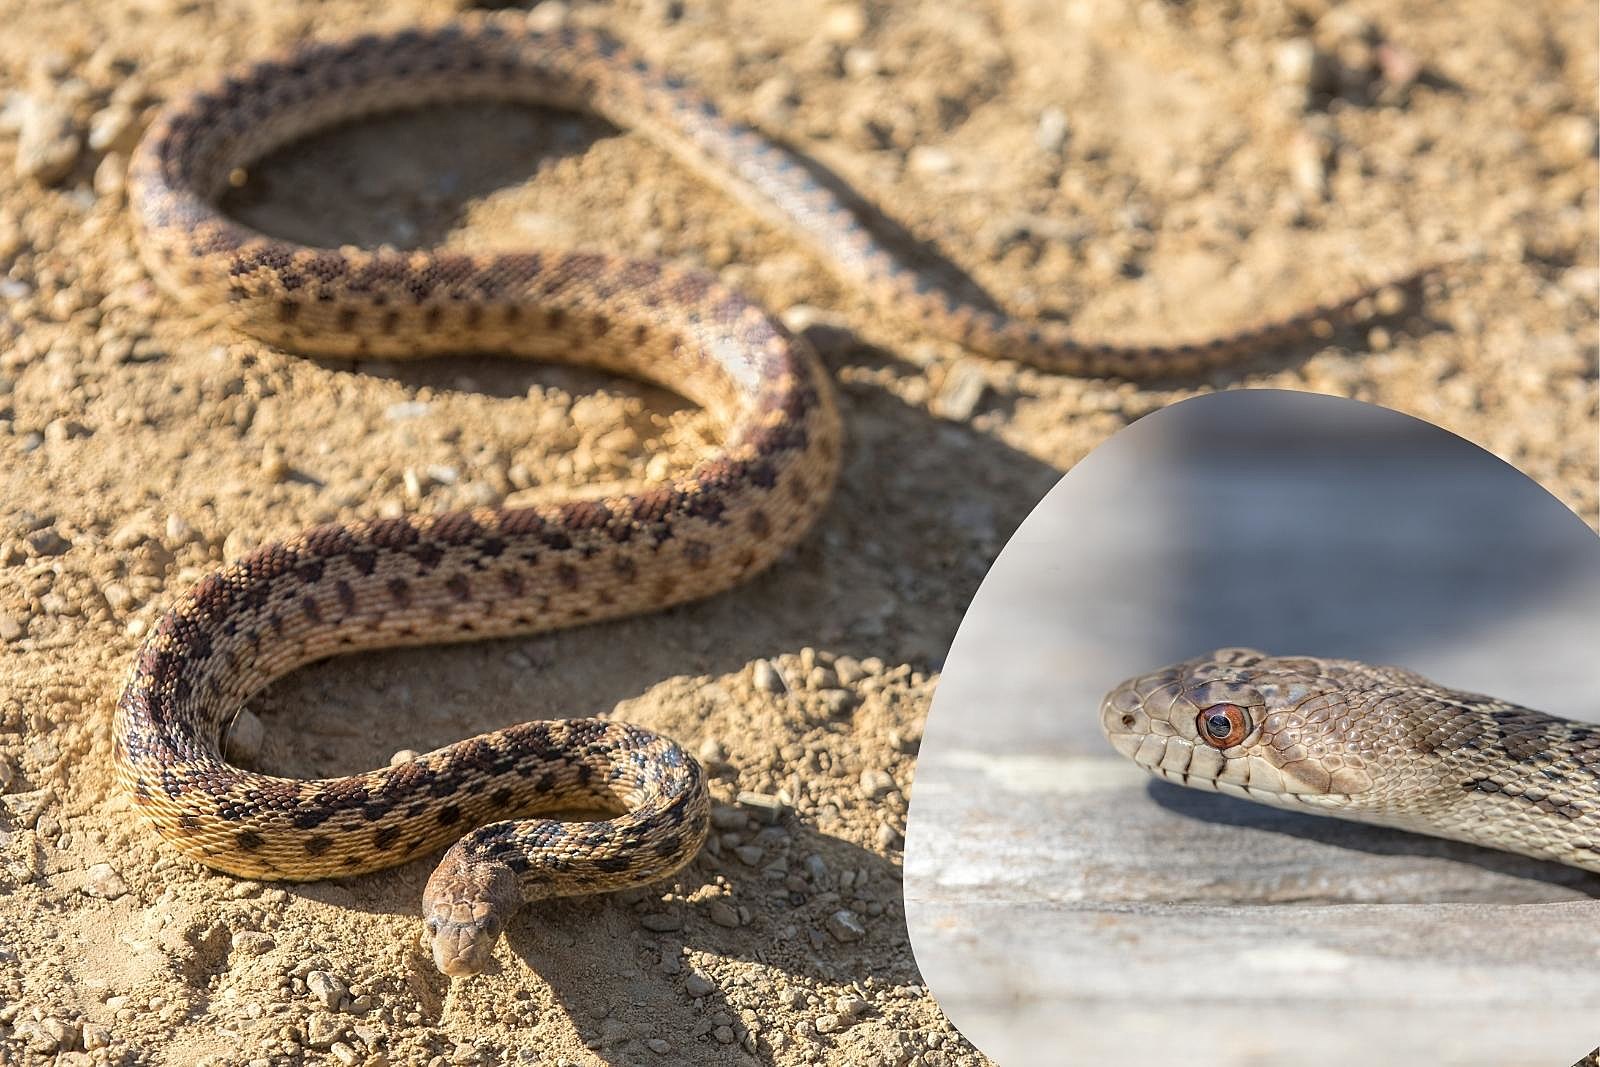 A defensively posed pacific gopher snake, with an inset of a close-up of its head.